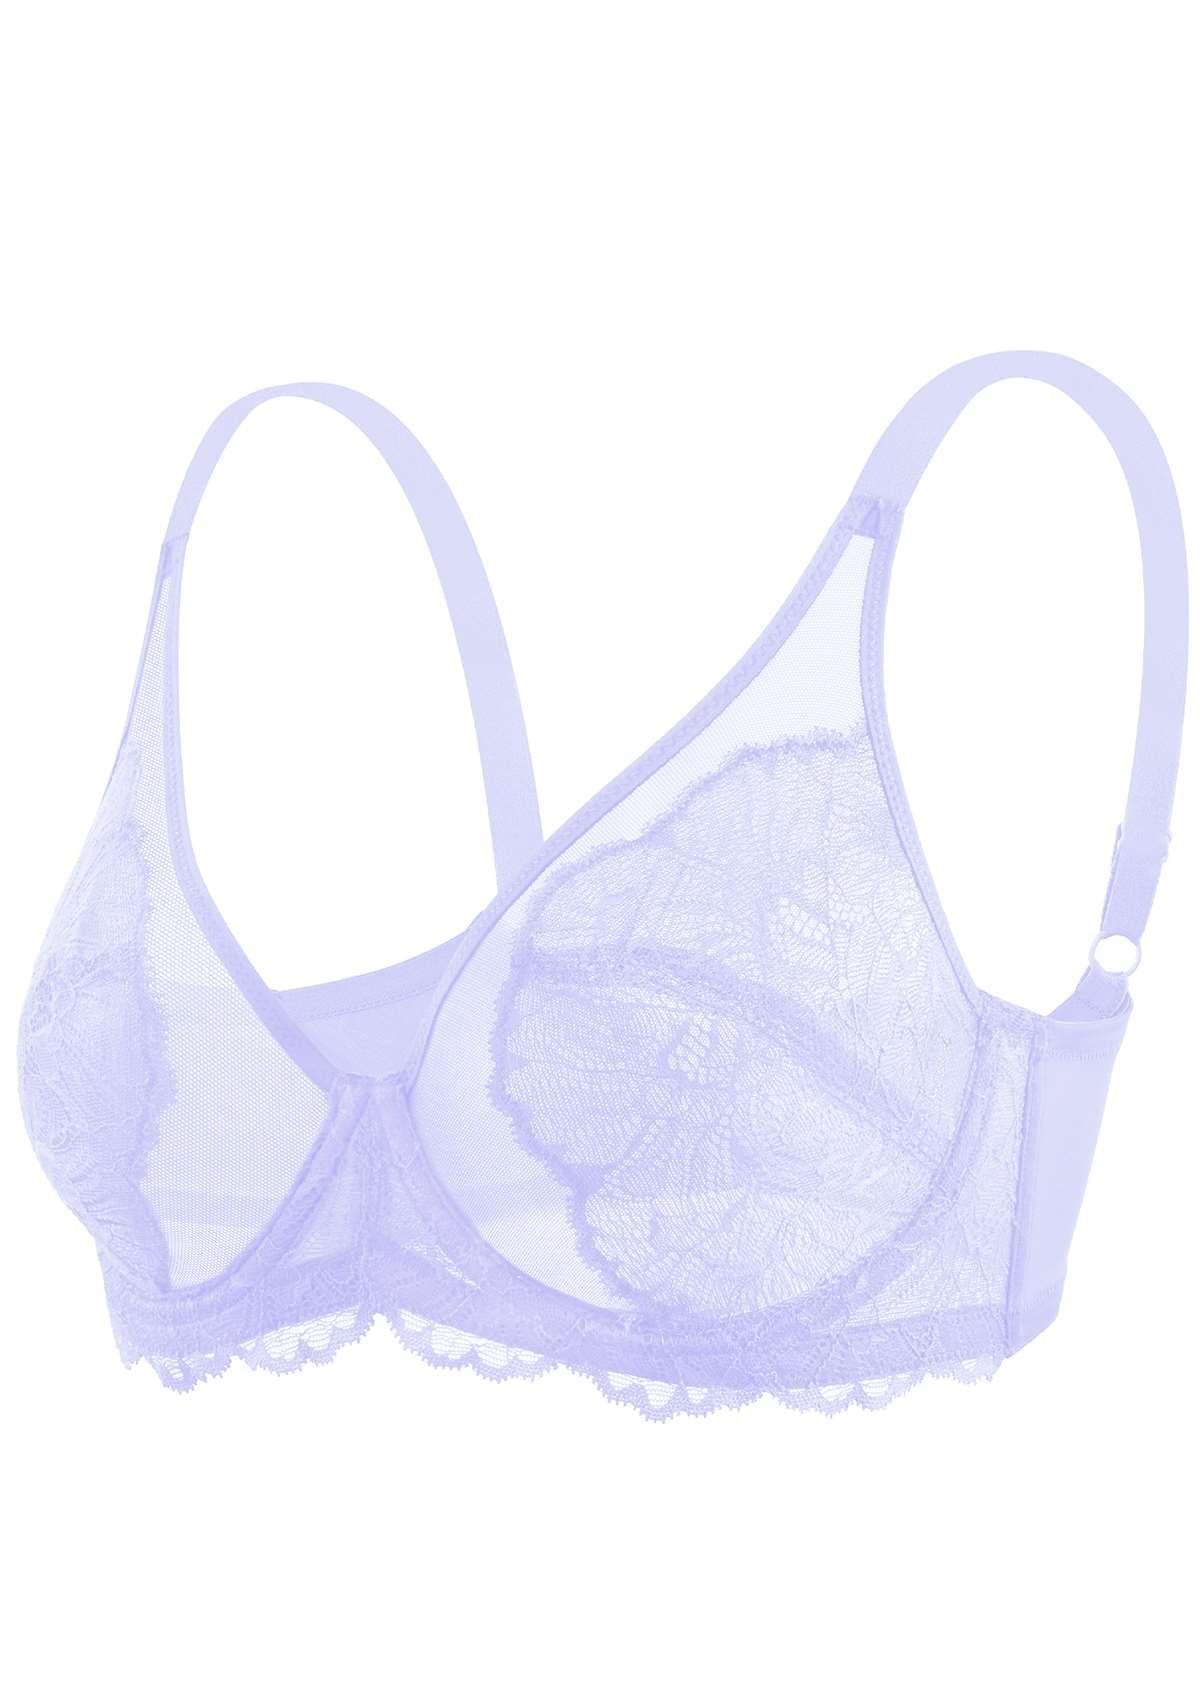 HSIA Blossom Transparent Lace Bra: Plus Size Wired Back Smoothing Bra - Purple / 40 / DDD/F